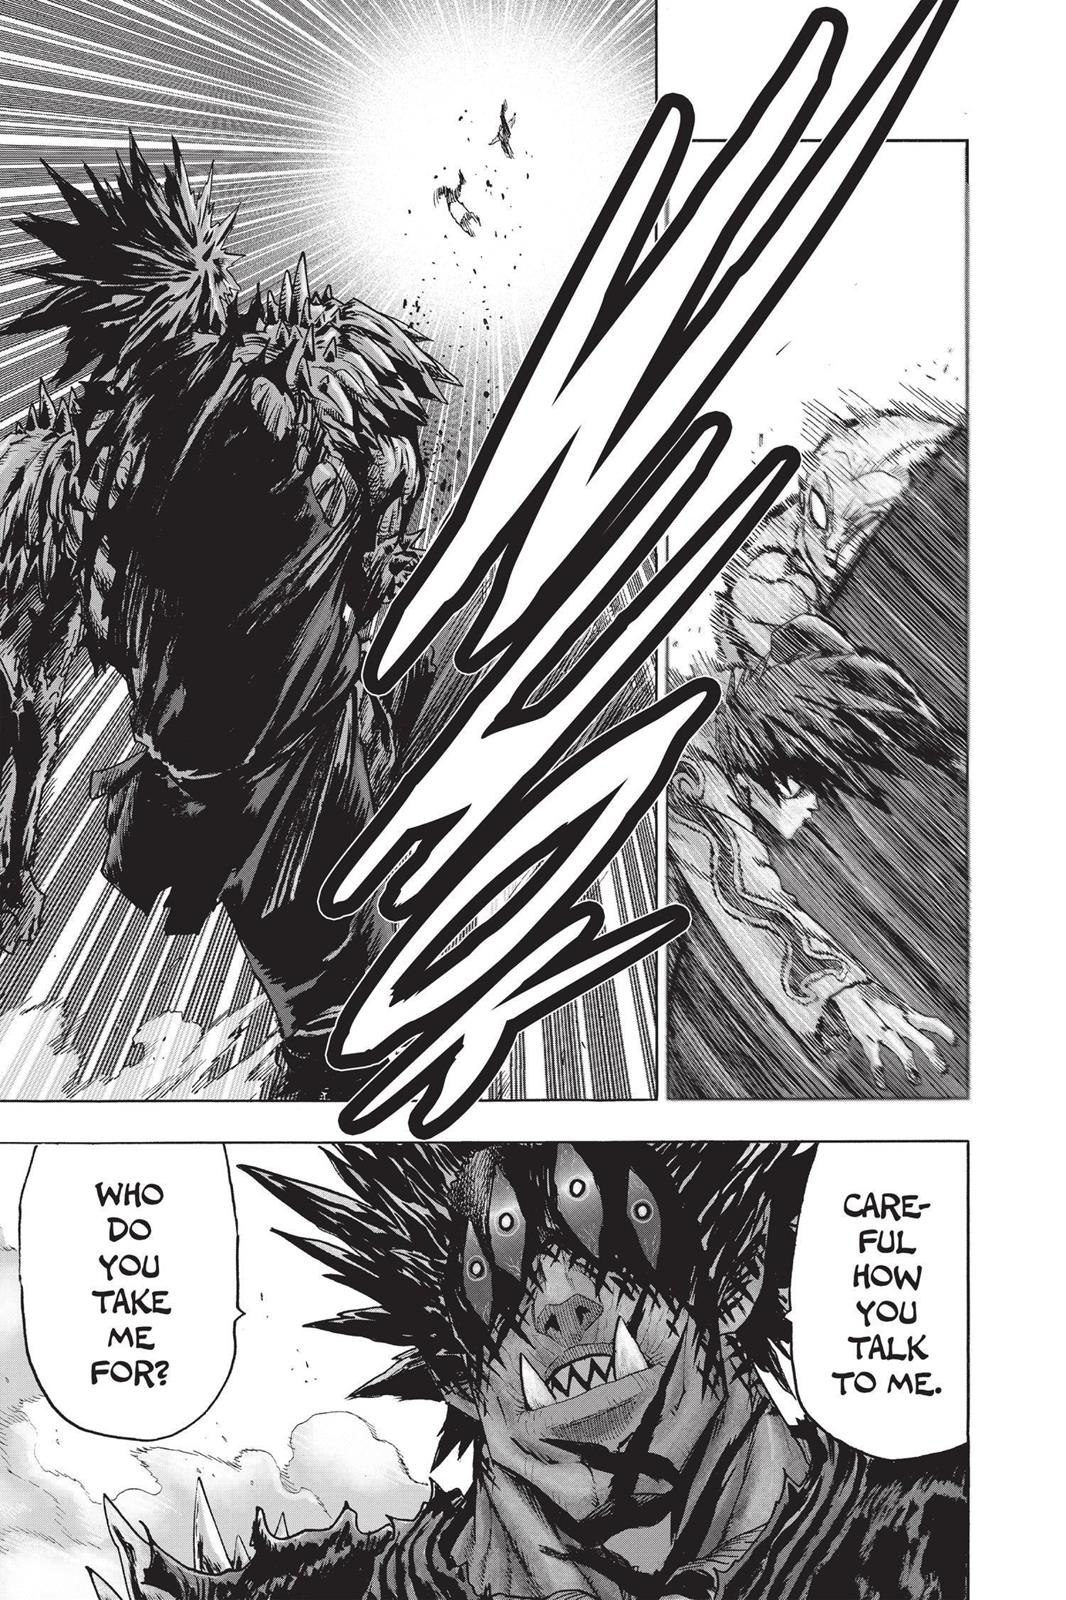 One-Punch Man, Punch 72 image 11